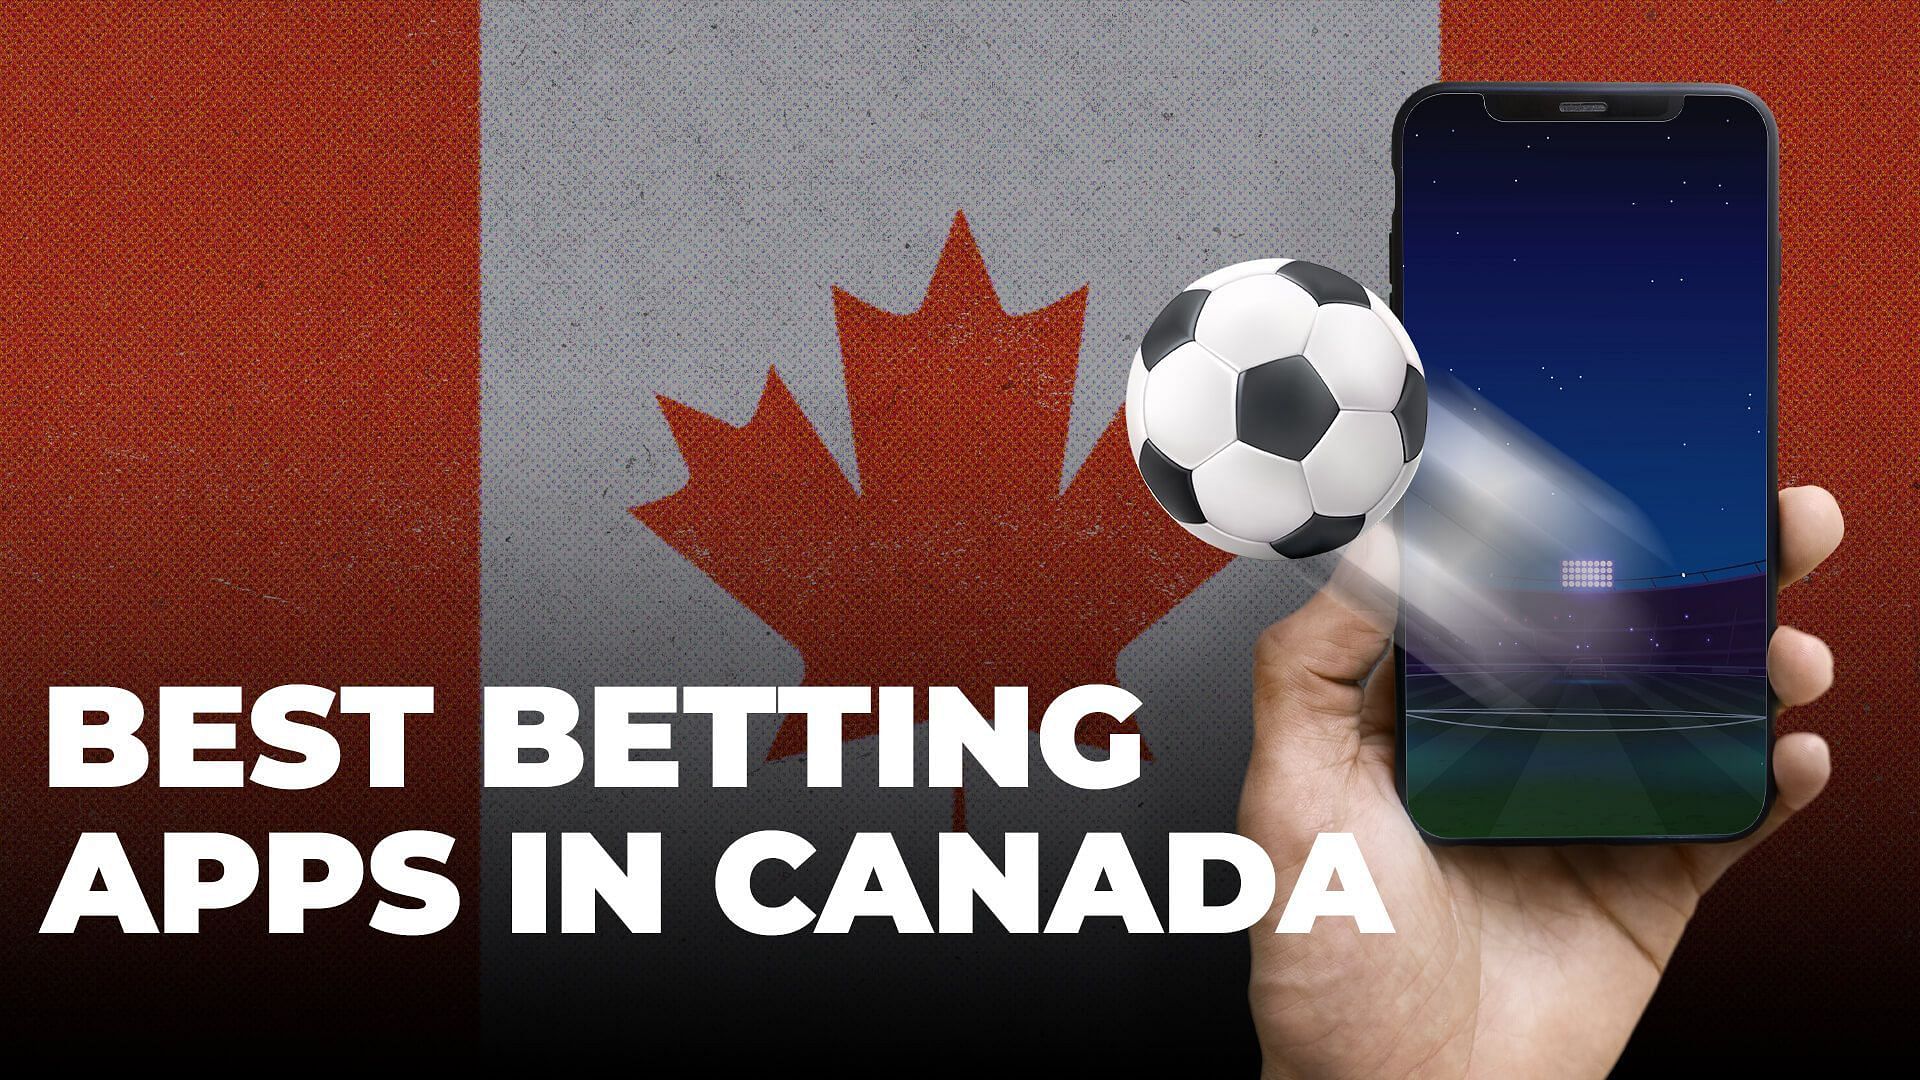 The top betting apps available in Canada